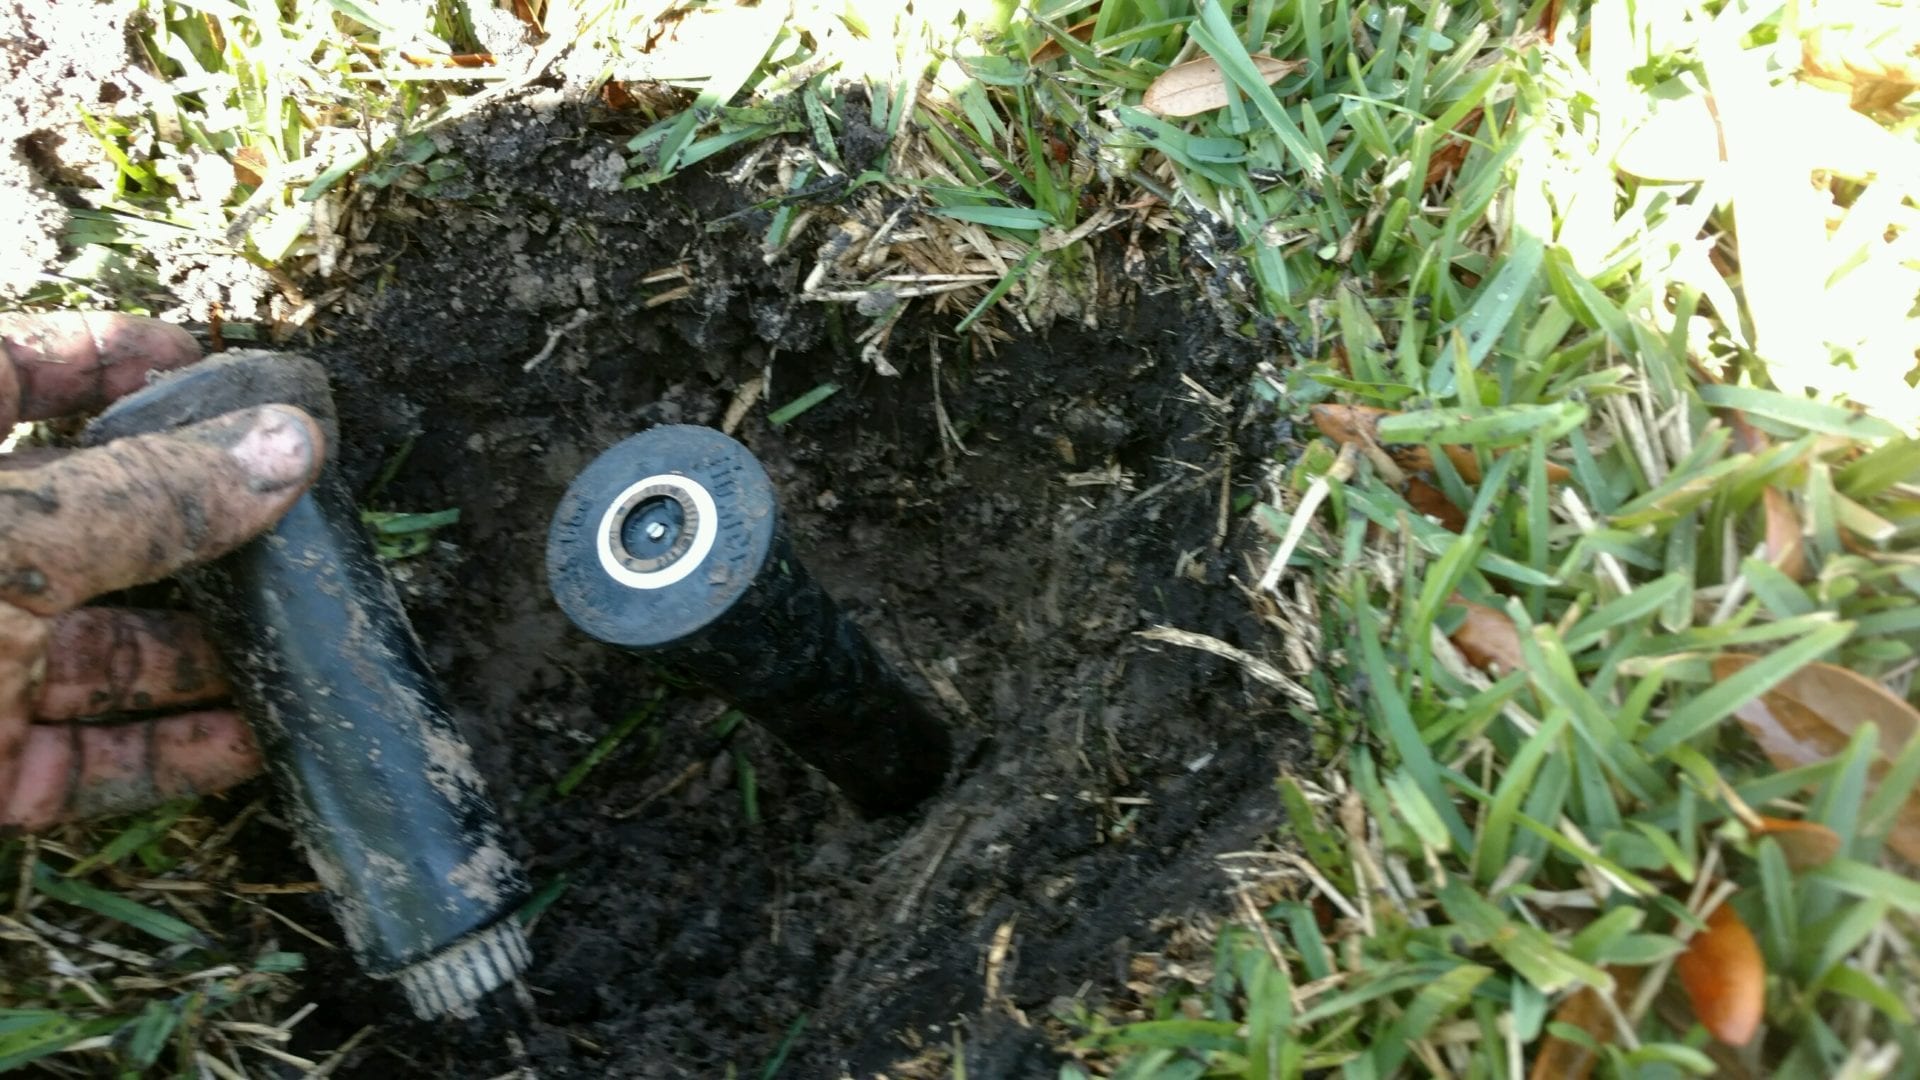 A black cylinder planted on the ground